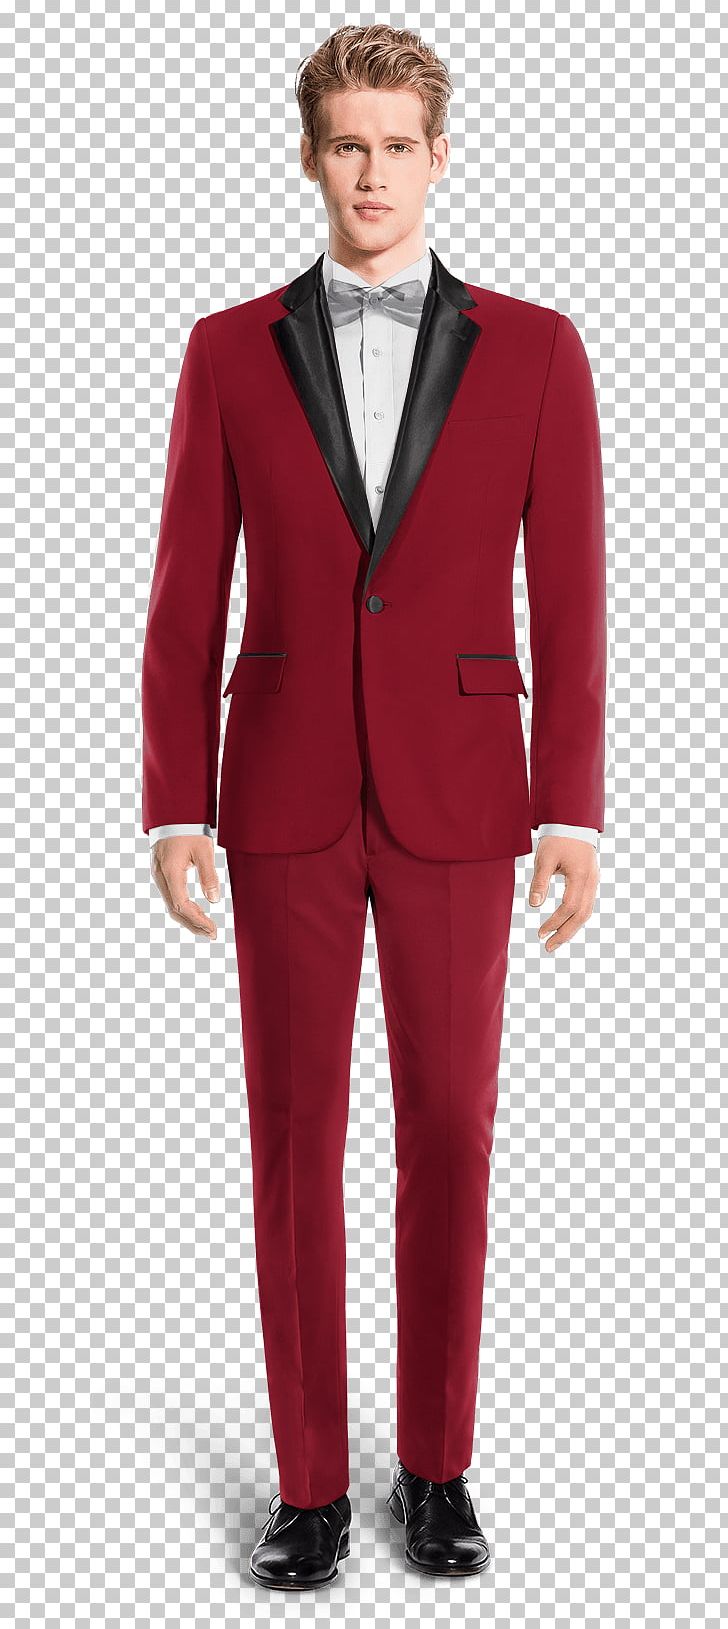 Tuxedo Double-breasted Suit Pants Wool PNG, Clipart, Blazer, Chino Cloth, Clothing, Coat, Corduroy Free PNG Download